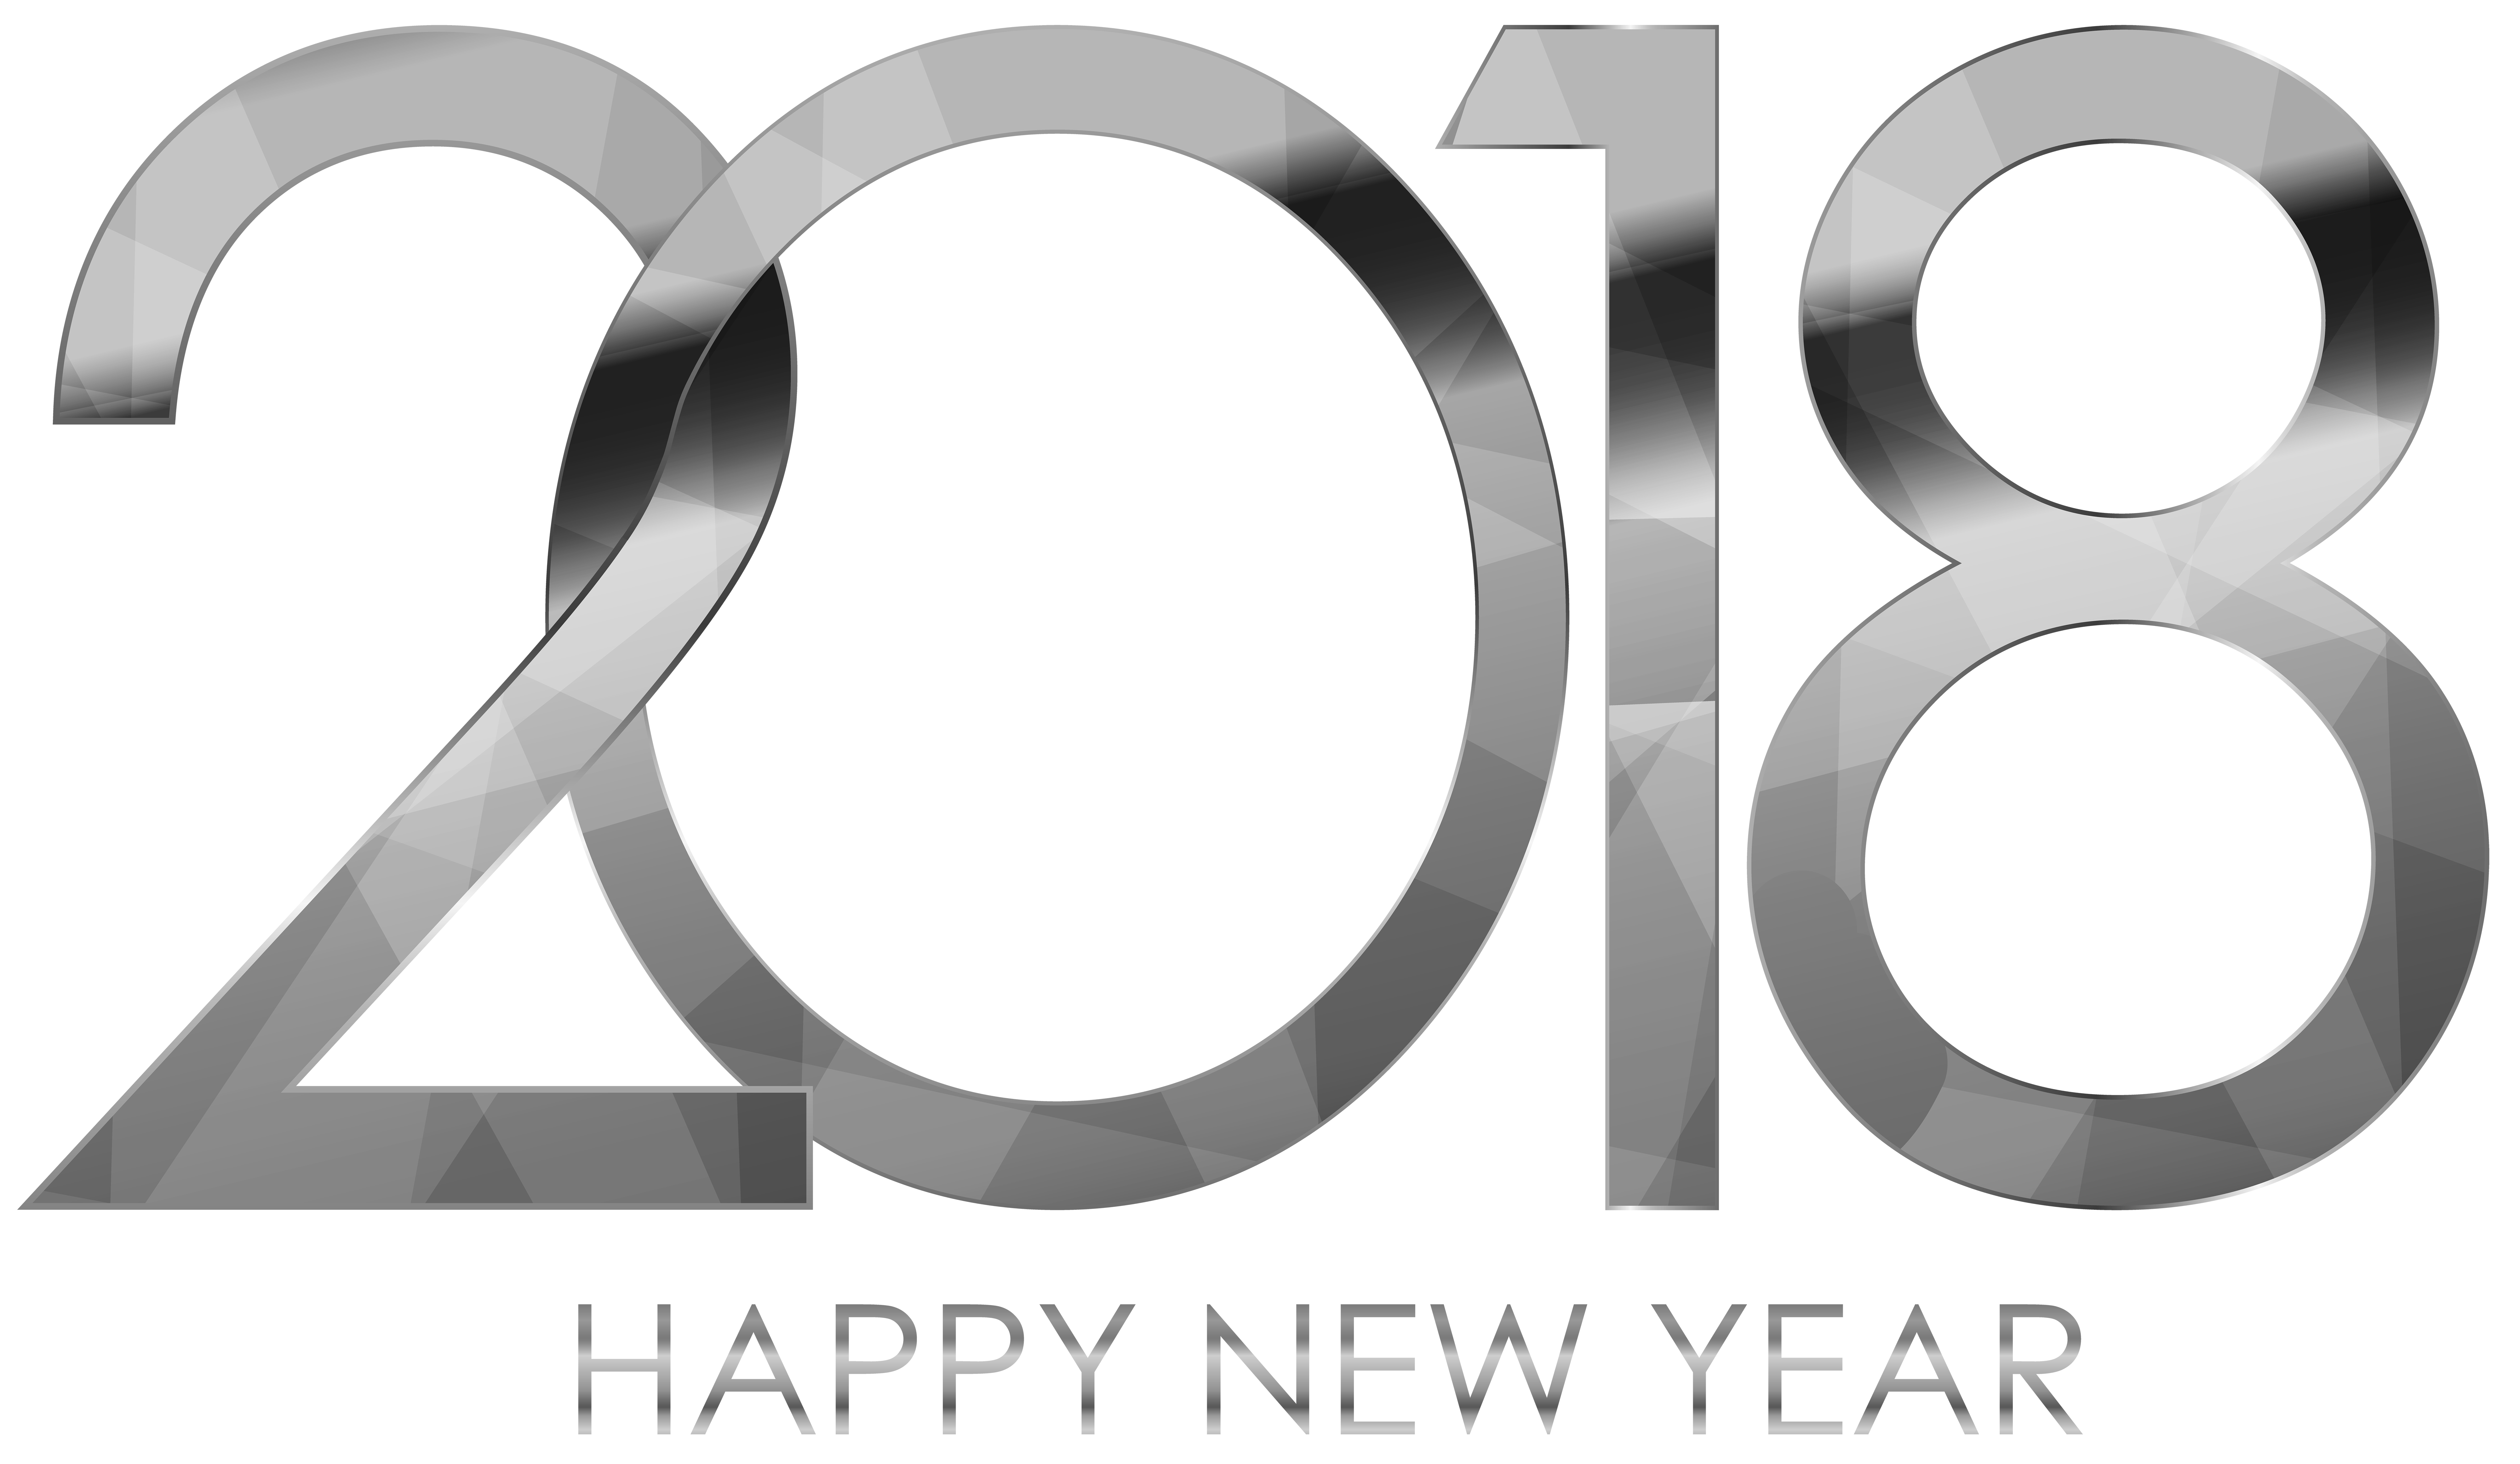  happy new year. Focus clipart quality clipart